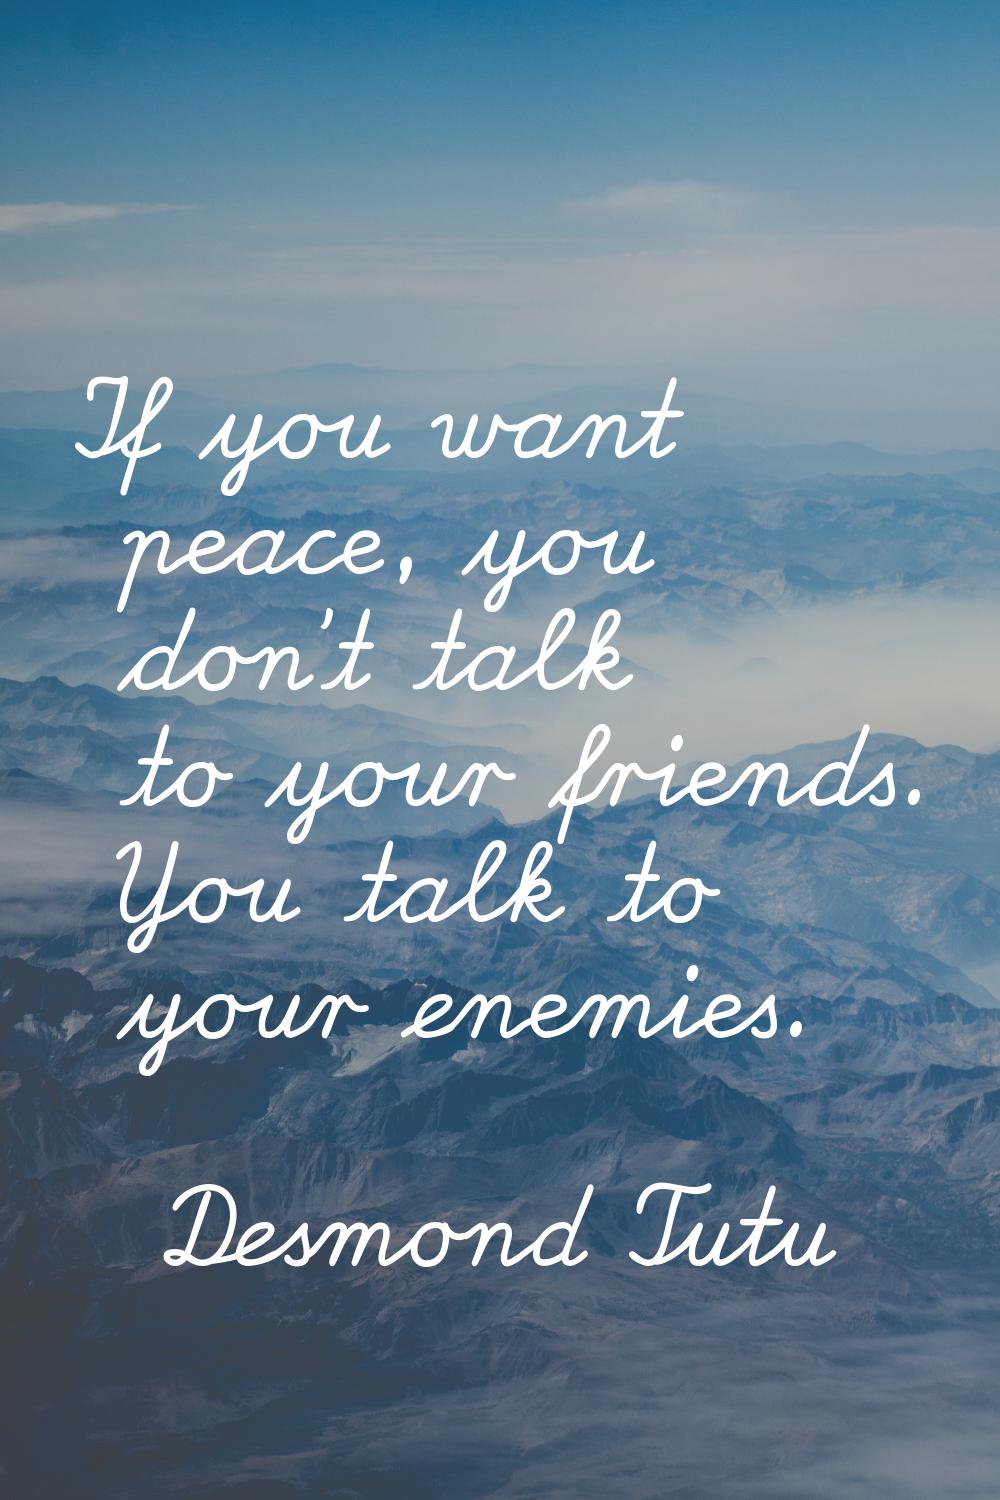 If you want peace, you don't talk to your friends. You talk to your enemies.